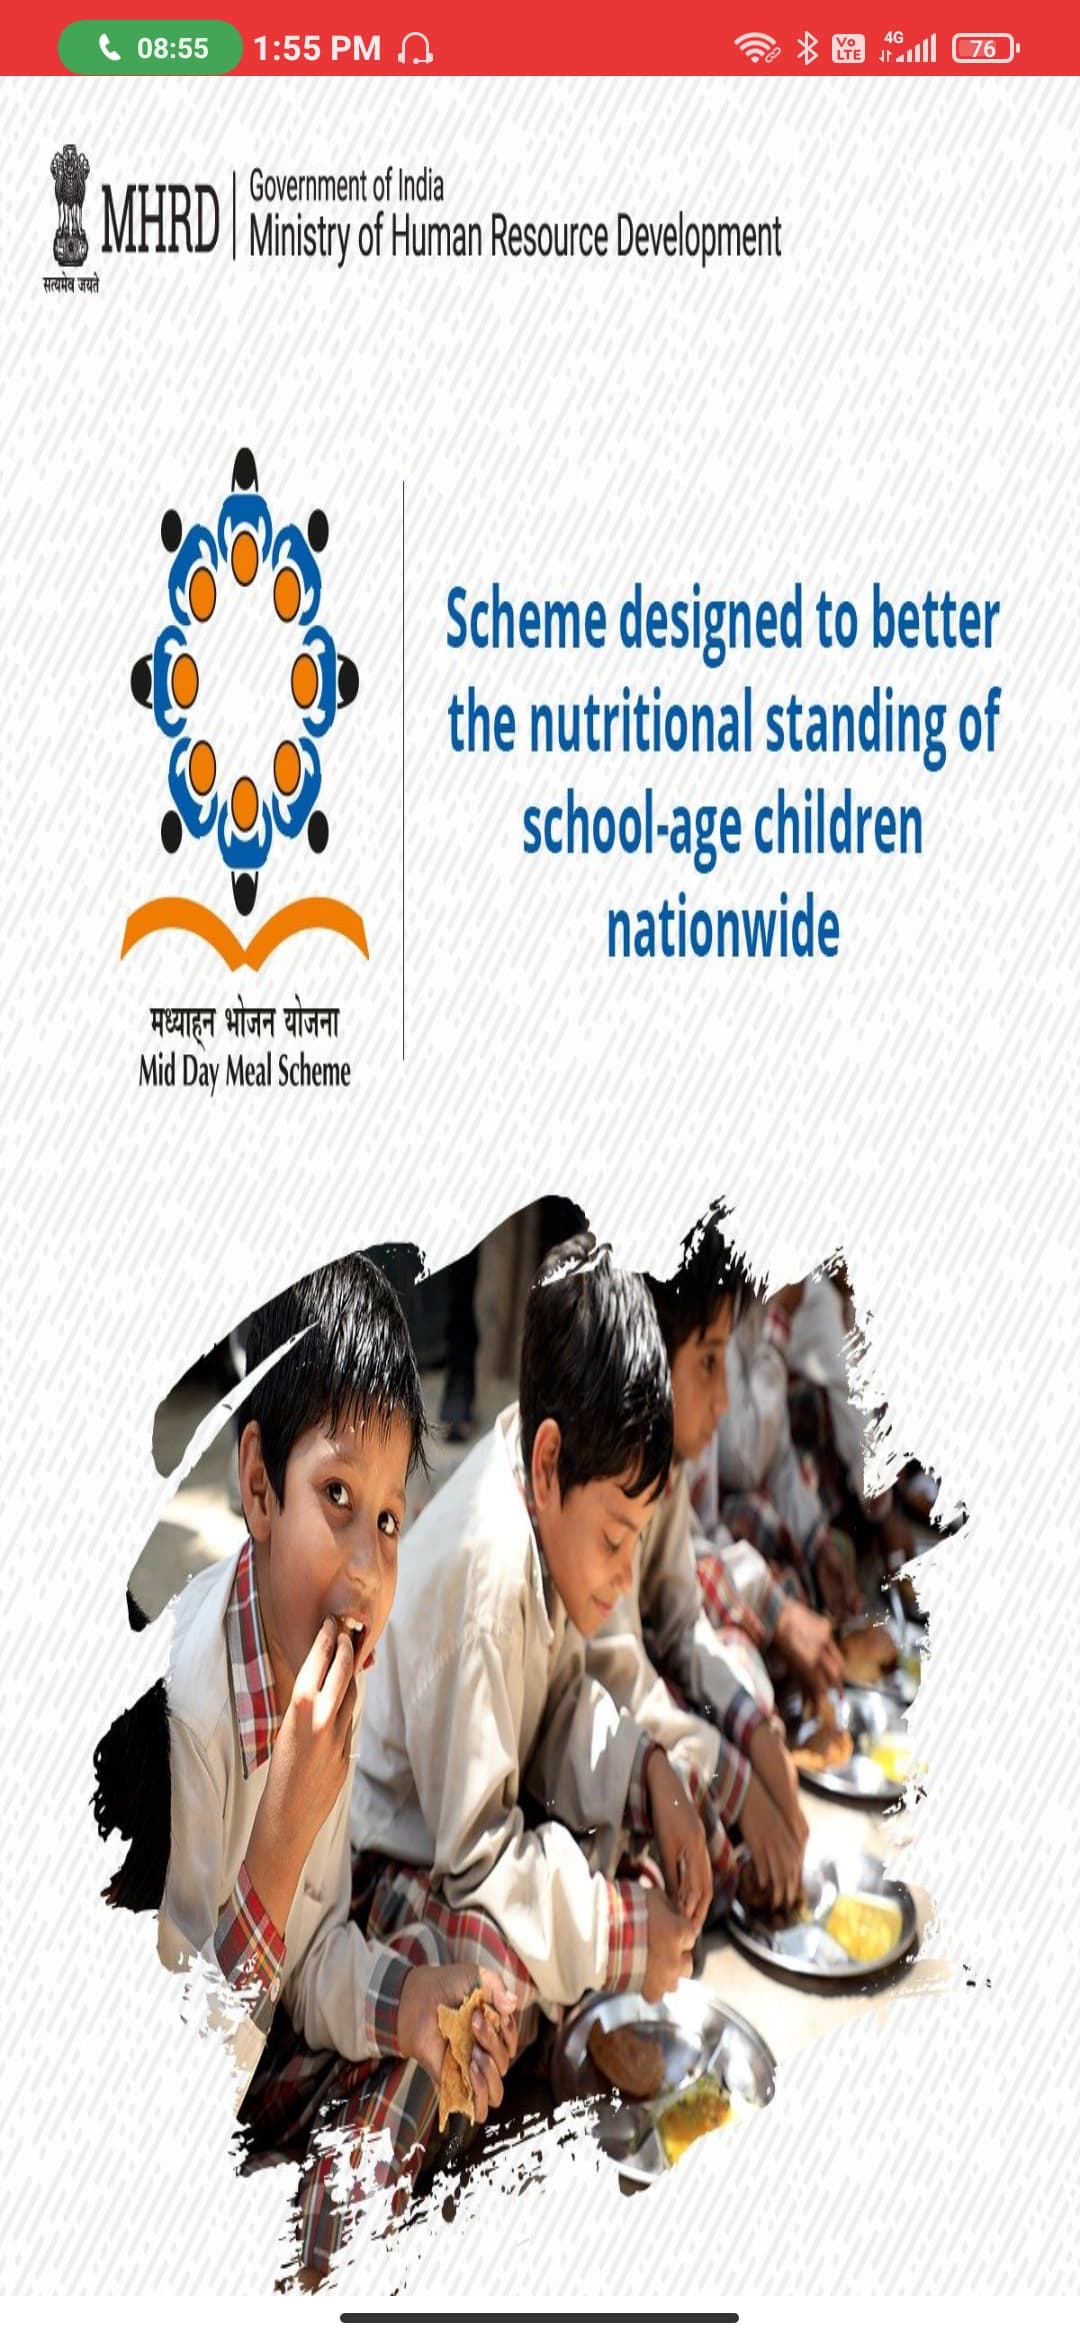 4G
C 08:55
1:55 PM A
Vo
LTE
(76
Government of India
MHRD| Ministry of Human Resource Development
सत्यमेव जयते
Scheme designed to better
the nutritional standing of
school-age children
nationwide
मध्याहन भोजन योजना
Mid Day Meal Scheme
